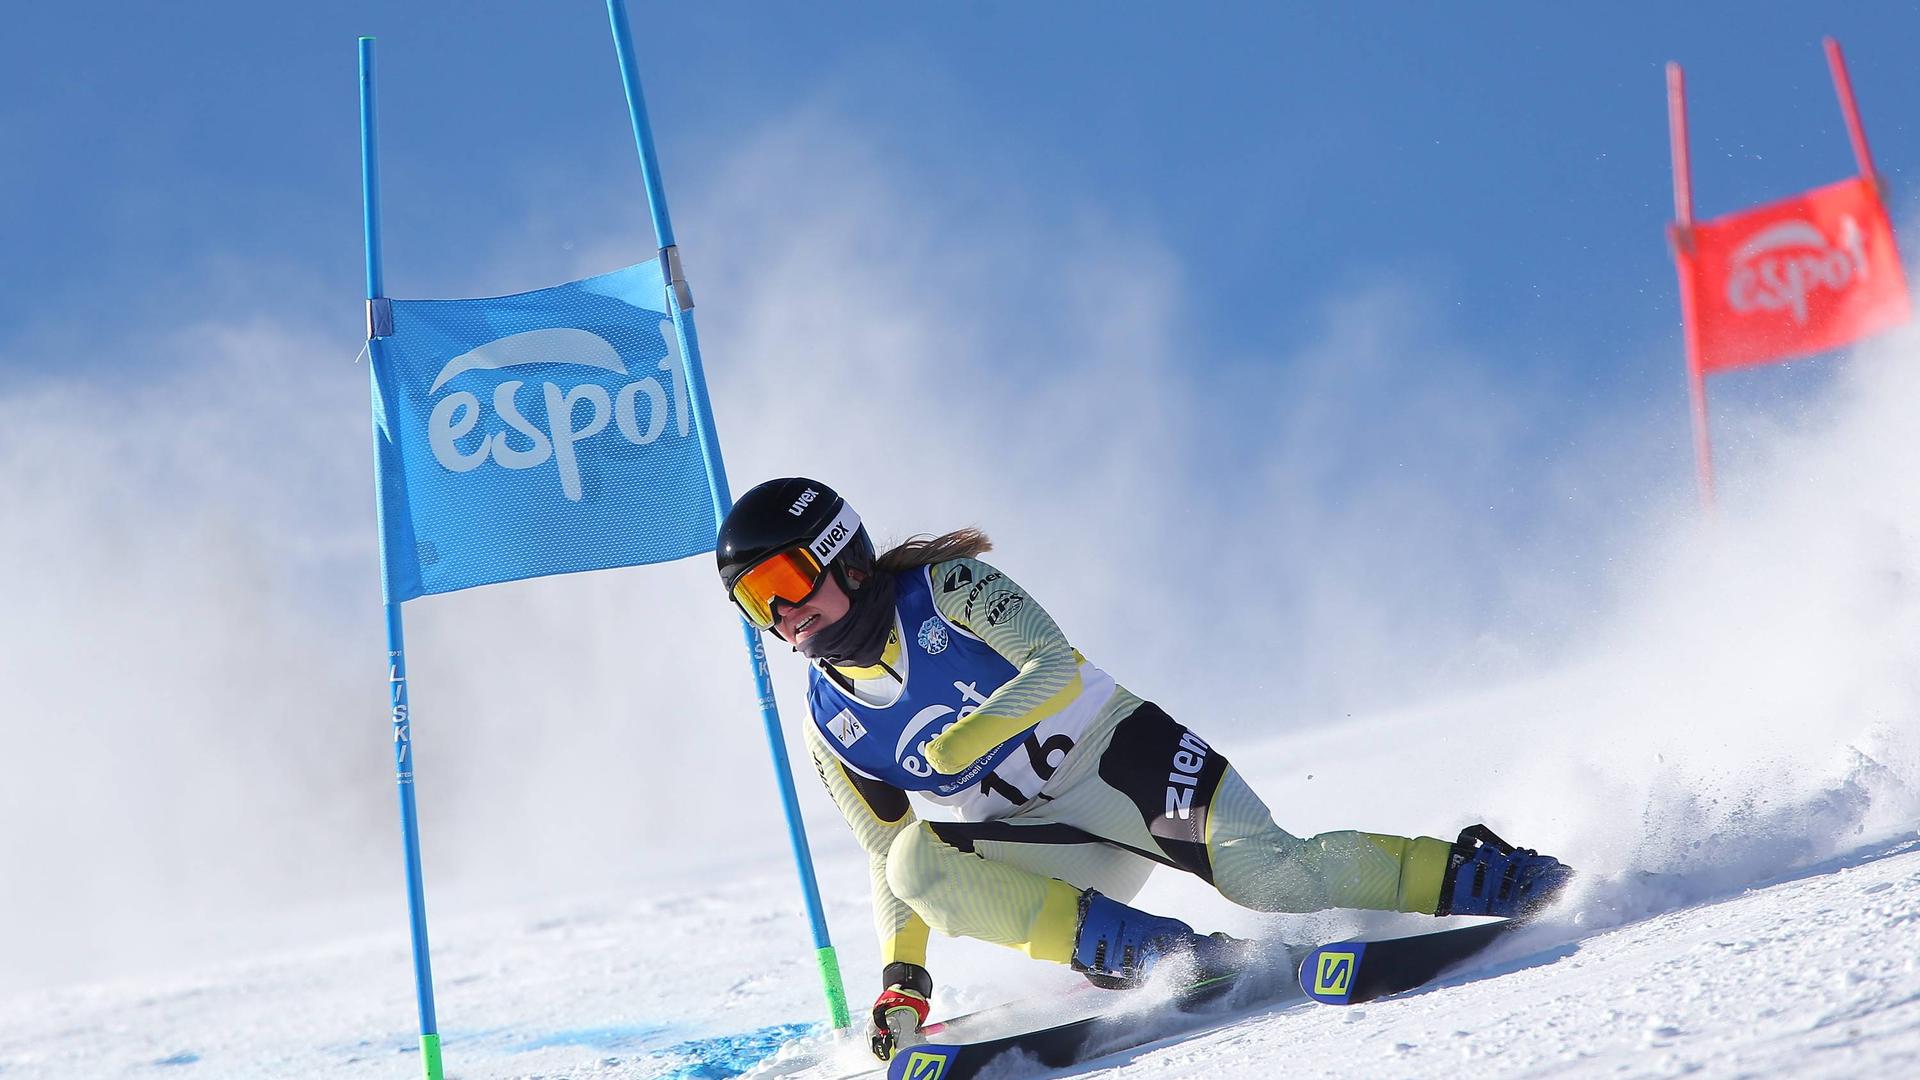 FIS Para Alpine Ski World Championships Espot, 26.01.2023 Andrea Rothfuss of Germany competing in Womens Giant Slalom Standing at Espot 2023 FIS Para Alpine Ski World Championships, Espot, Spain, 22.01.2023 Photo by Marcus Hartmann *** FIS Para Alpine Ski World Championships Espot, 26 01 2023 Andrea Rothfuss of Germany competing in Womens Giant Slalom Standing at Espot 2023 FIS Para Alpine Ski World Championships, Espot, Spain, 22 01 2023 Photo by Marcus Hartmann Copyright: xBEAUTIFULxSPORTS/MarcusxHartmannx